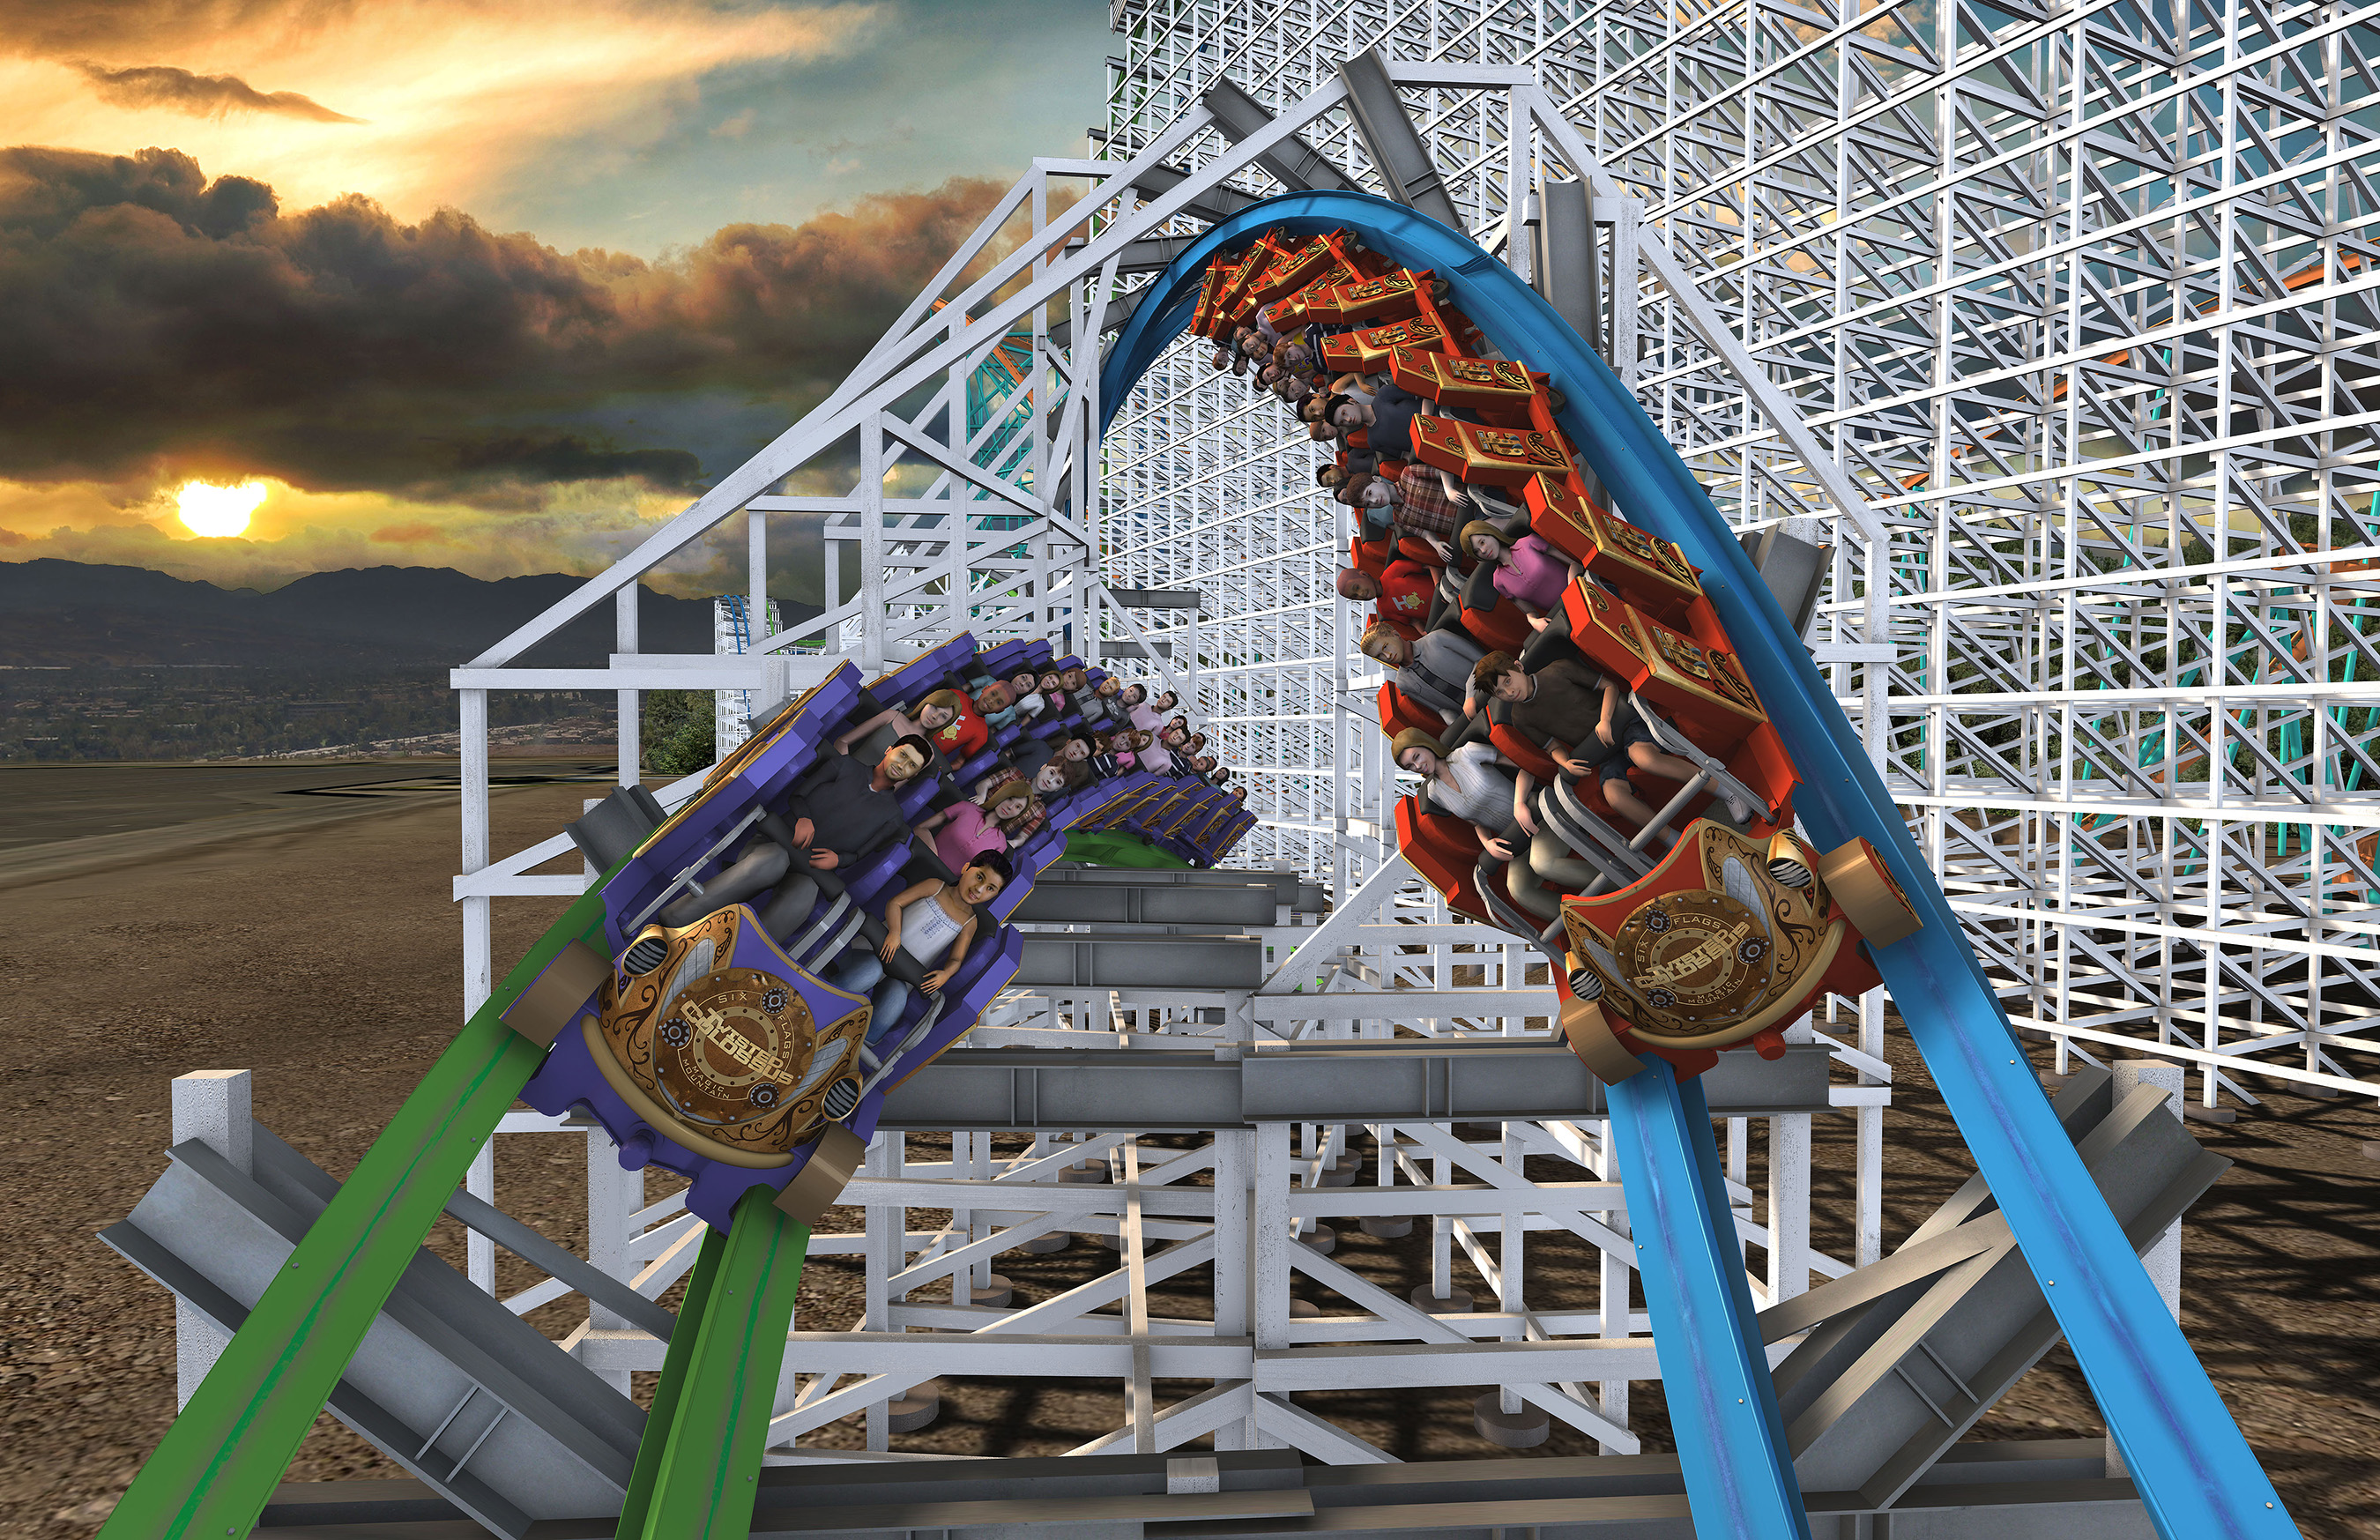 Twisted Colossus - NEW at Six Flags Magic Mountain - Spring 2015